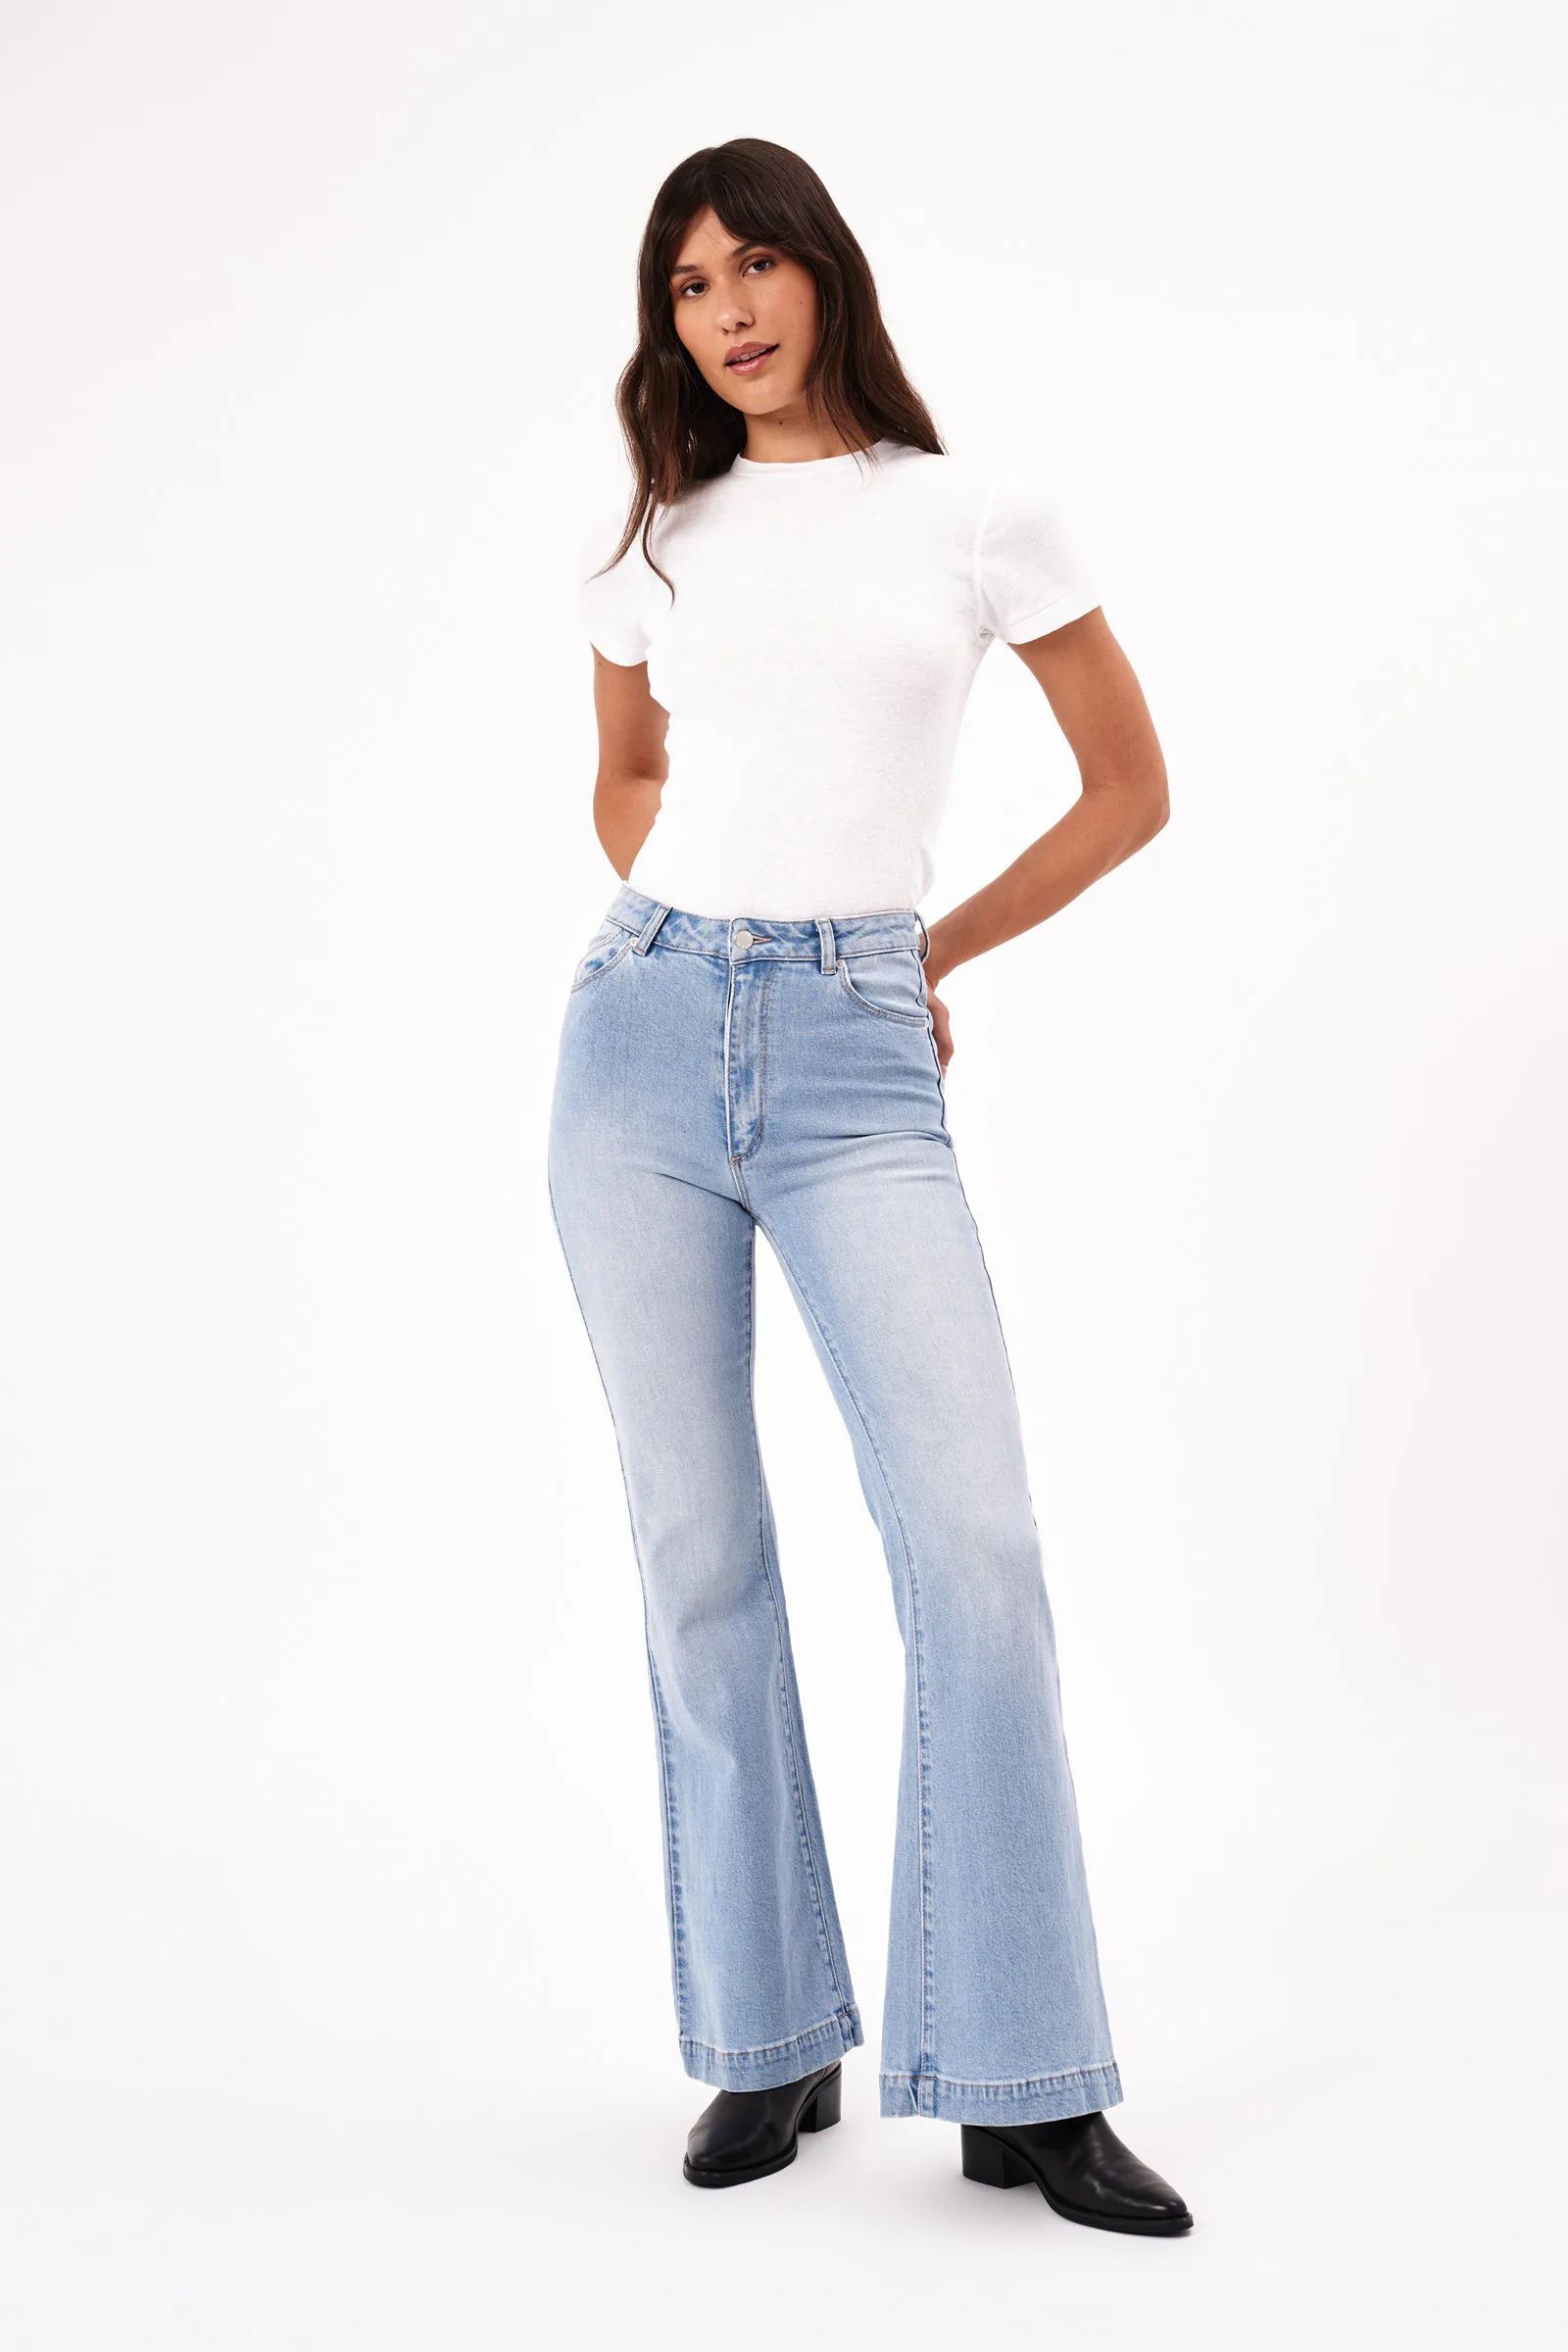 Buy Eastcoast Flare - Sky Online | Rollas Jeans | Rolla's Jeans US/CAN